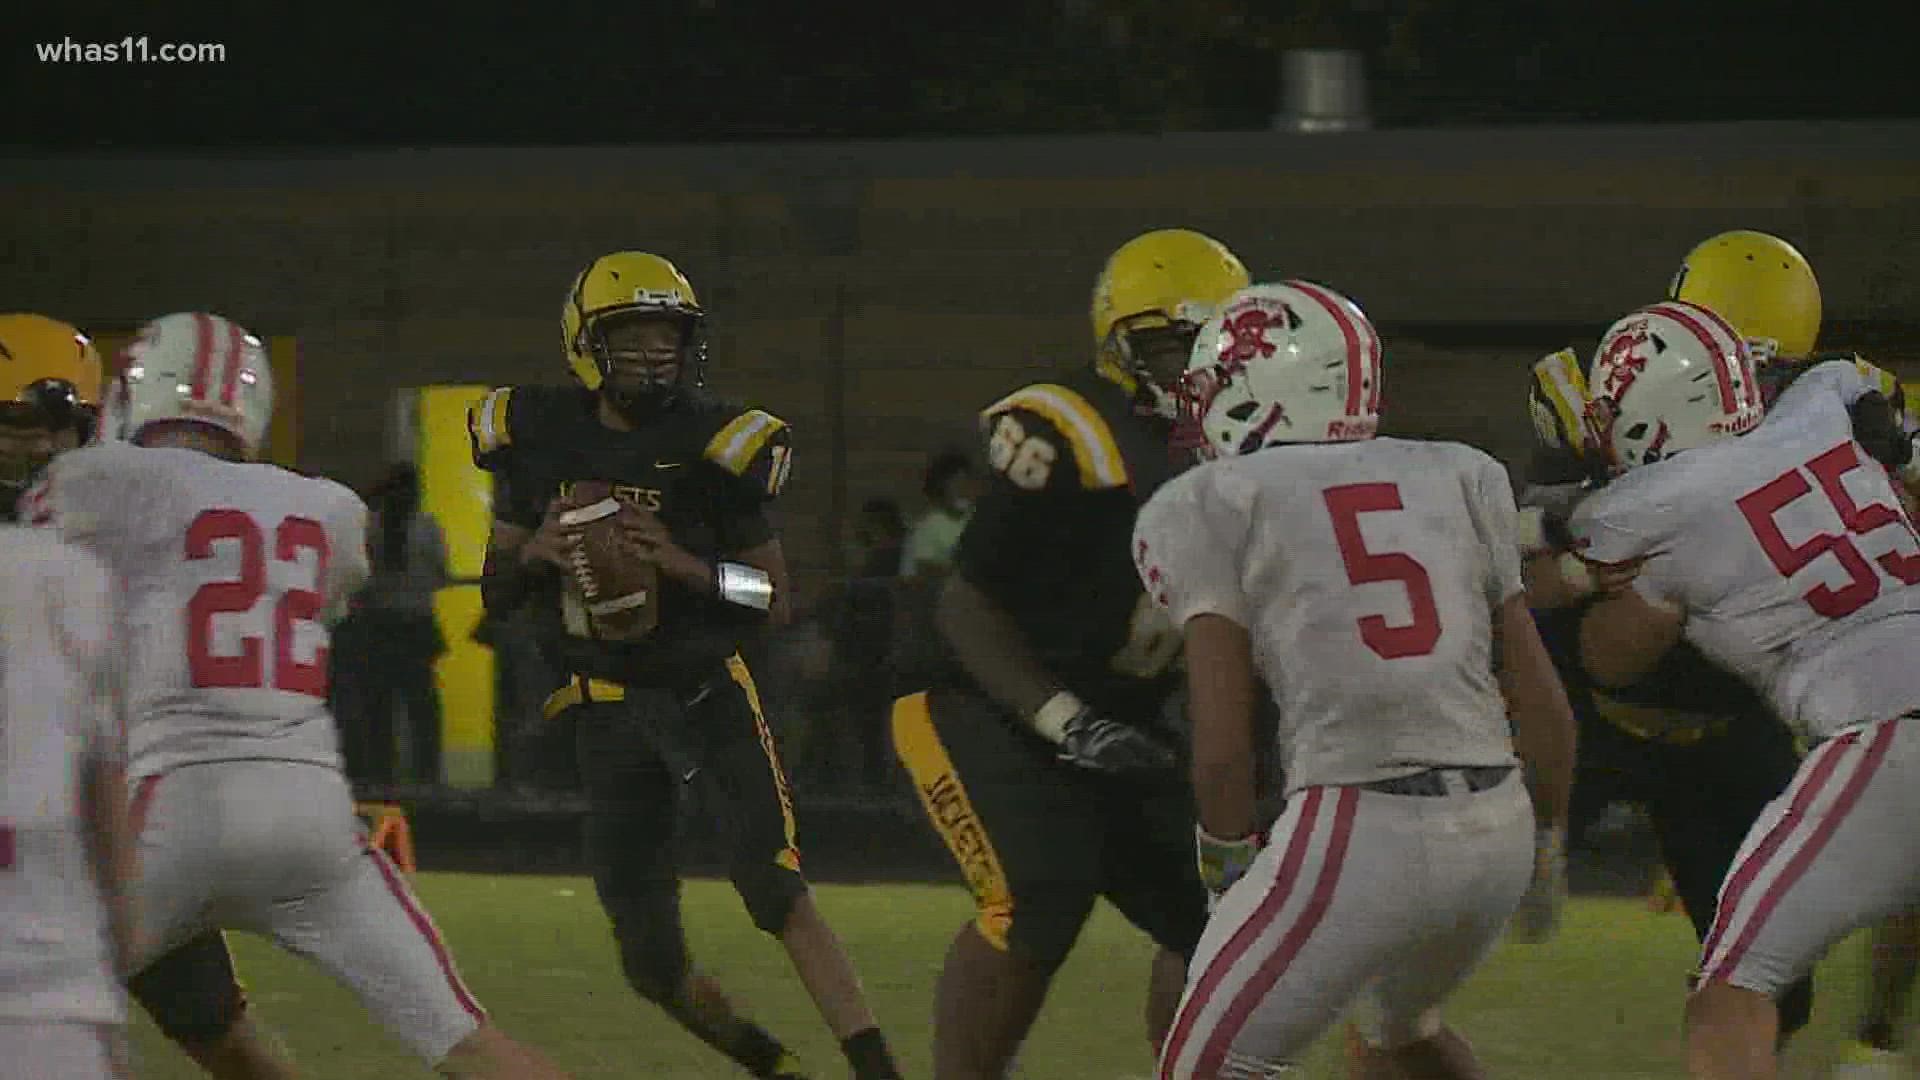 Central defeats Belfry 30-6 in this Game of the Week.